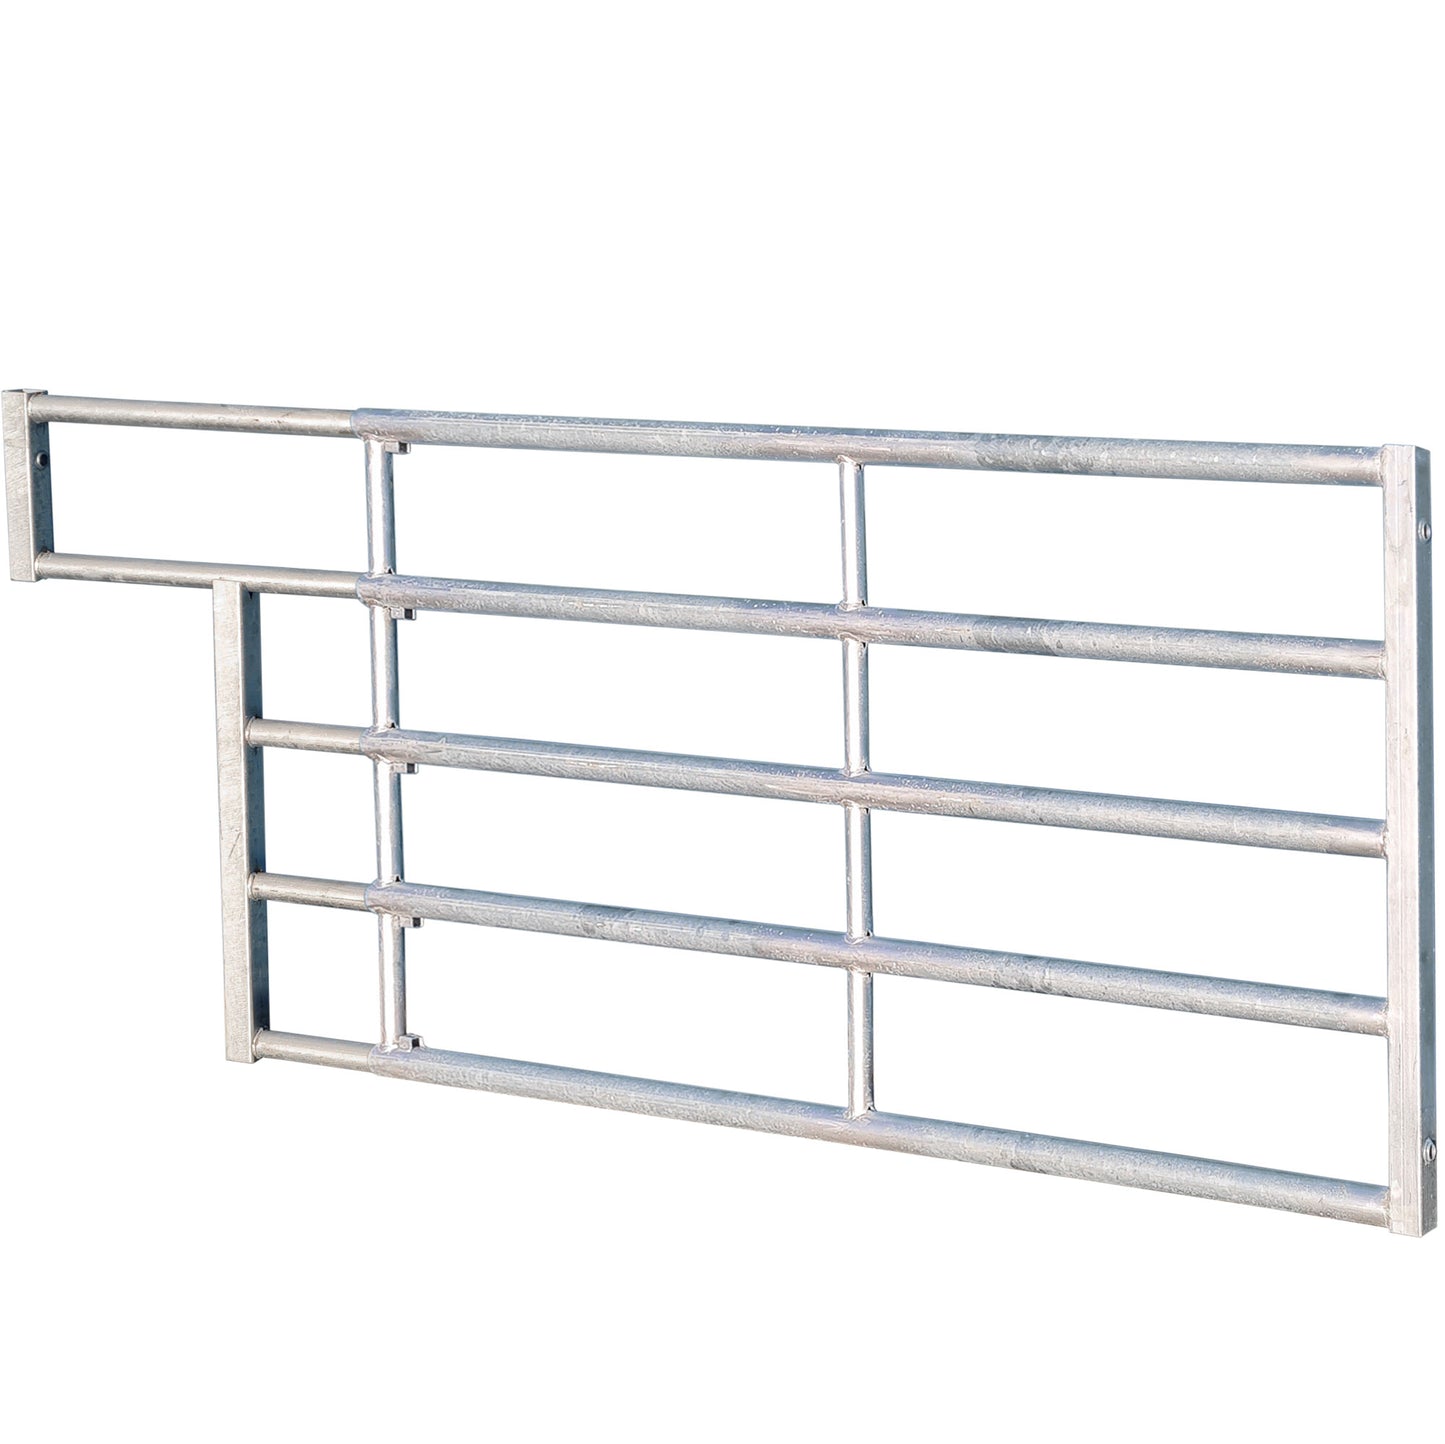 Pedigree 5 Bar Extendable Panel with Trough Attachment